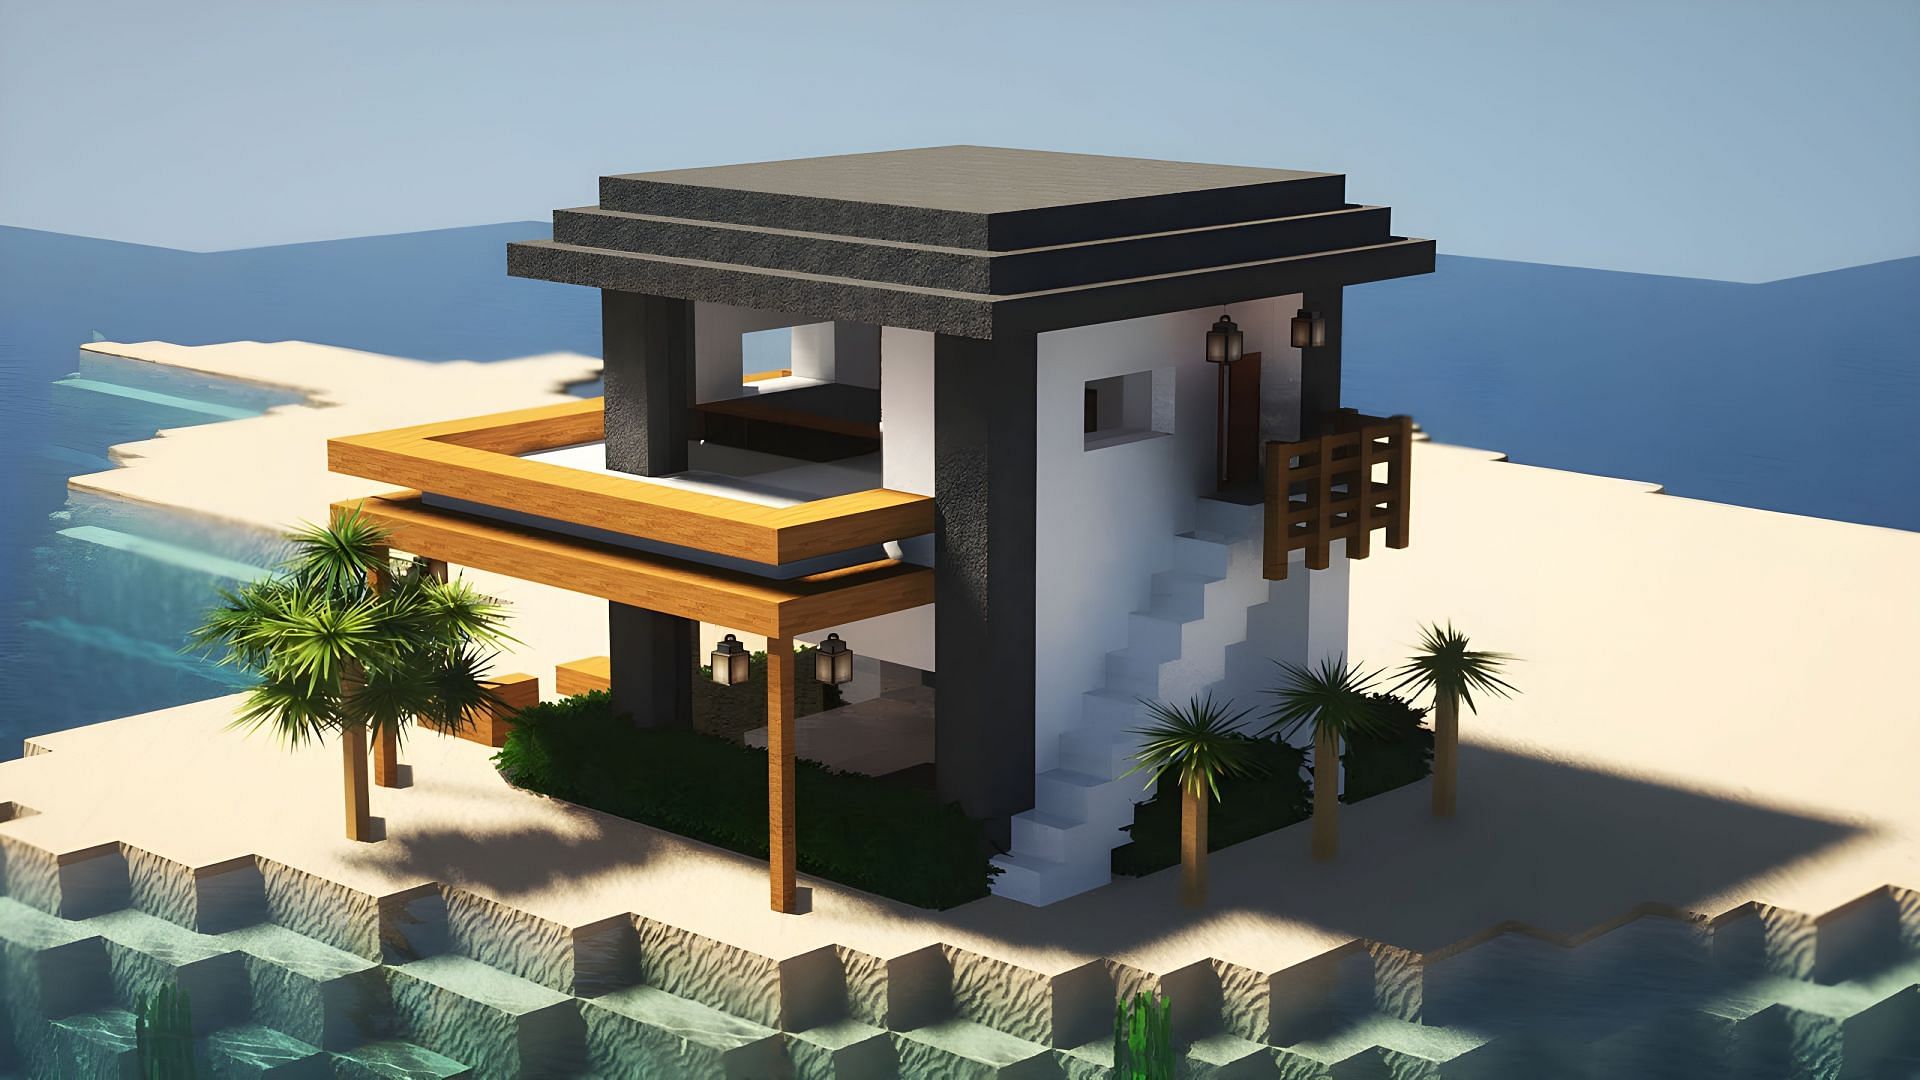 Minecraft beach houses are beautiful builds (Image via Youtube/CurtisBuilds)